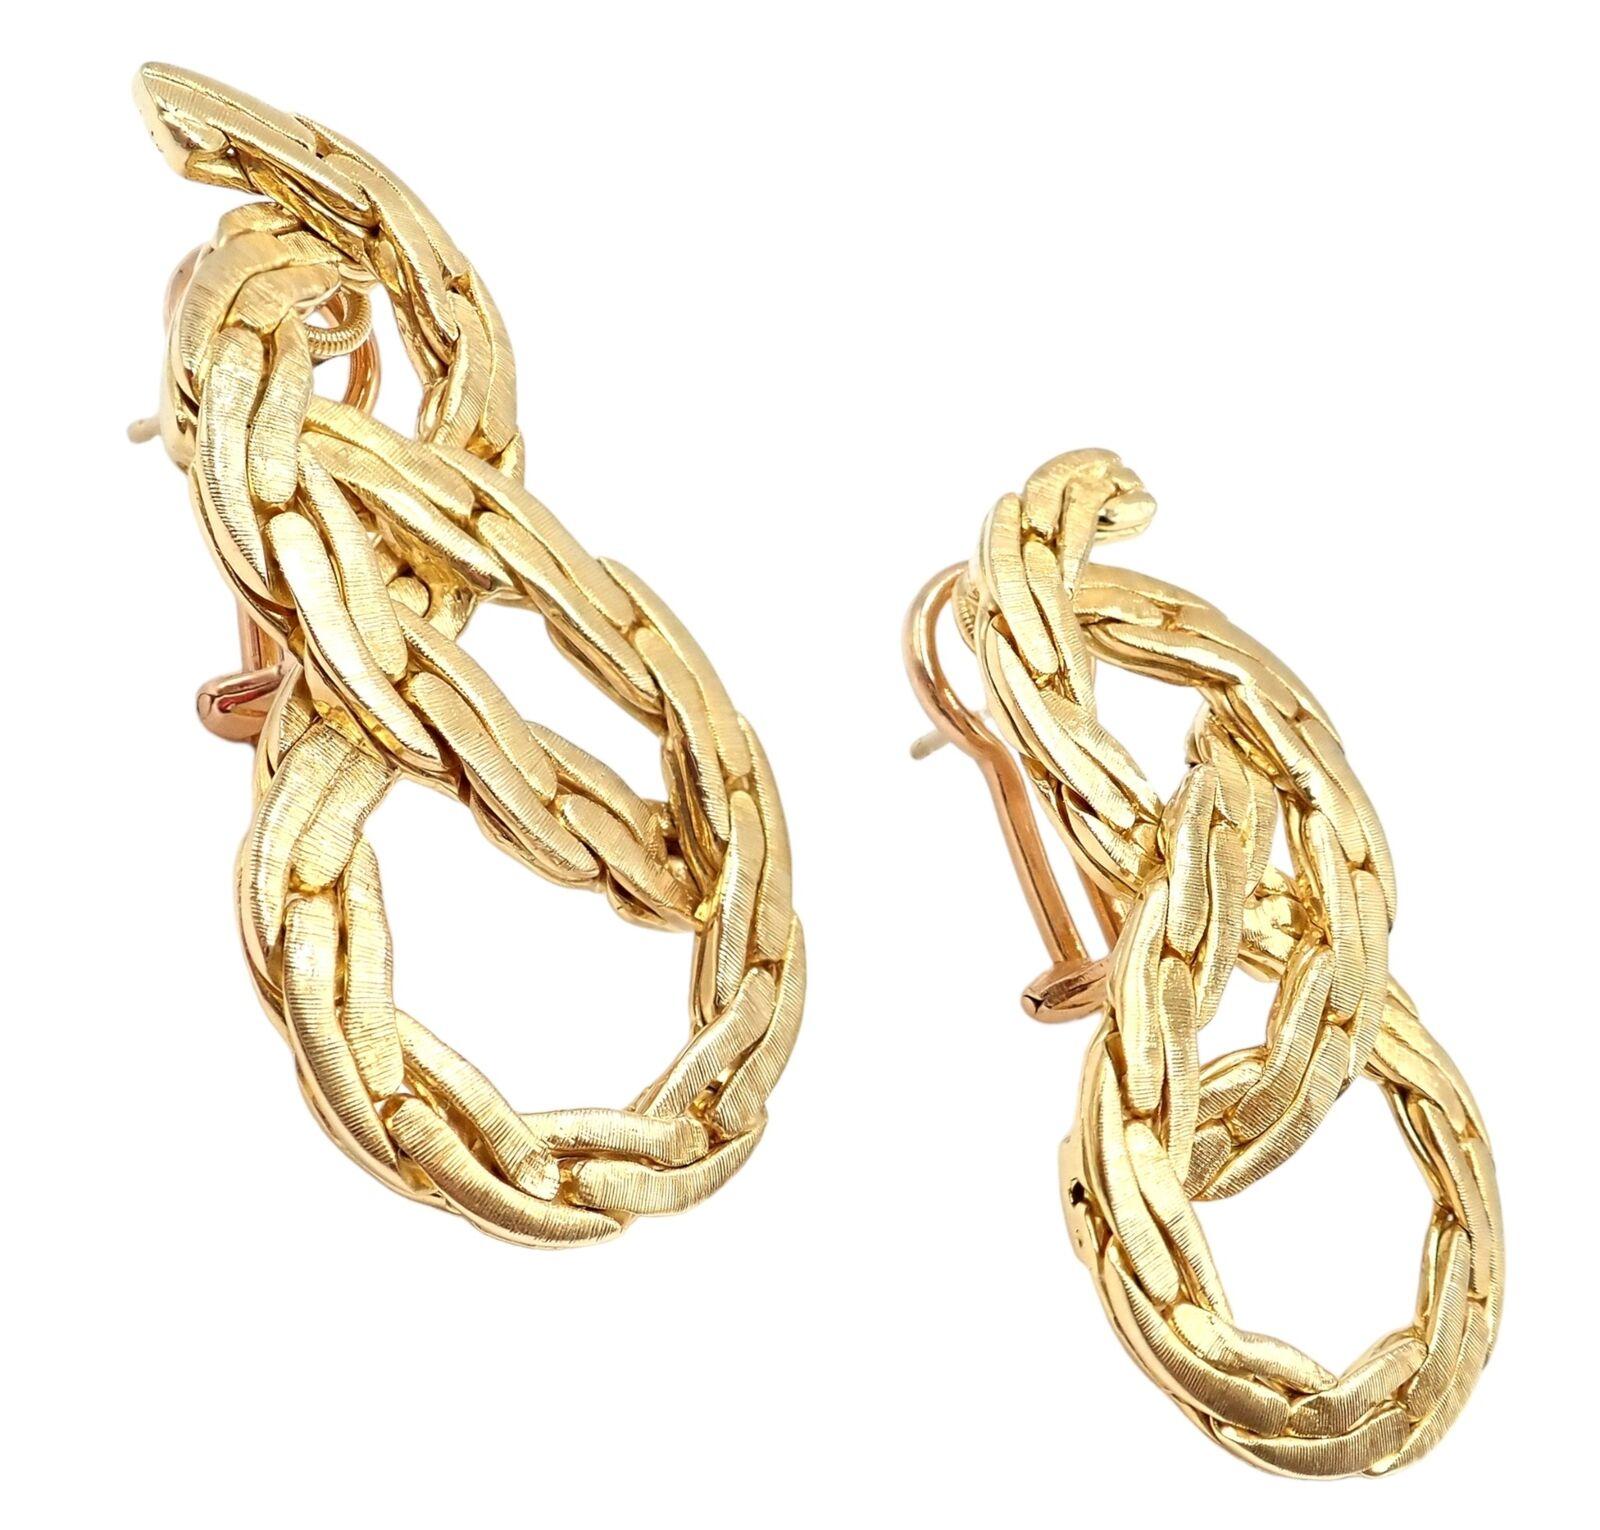 Vintage Buccellati Knot Rope Coil Yellow Gold Drop Earrings In Excellent Condition For Sale In Holland, PA